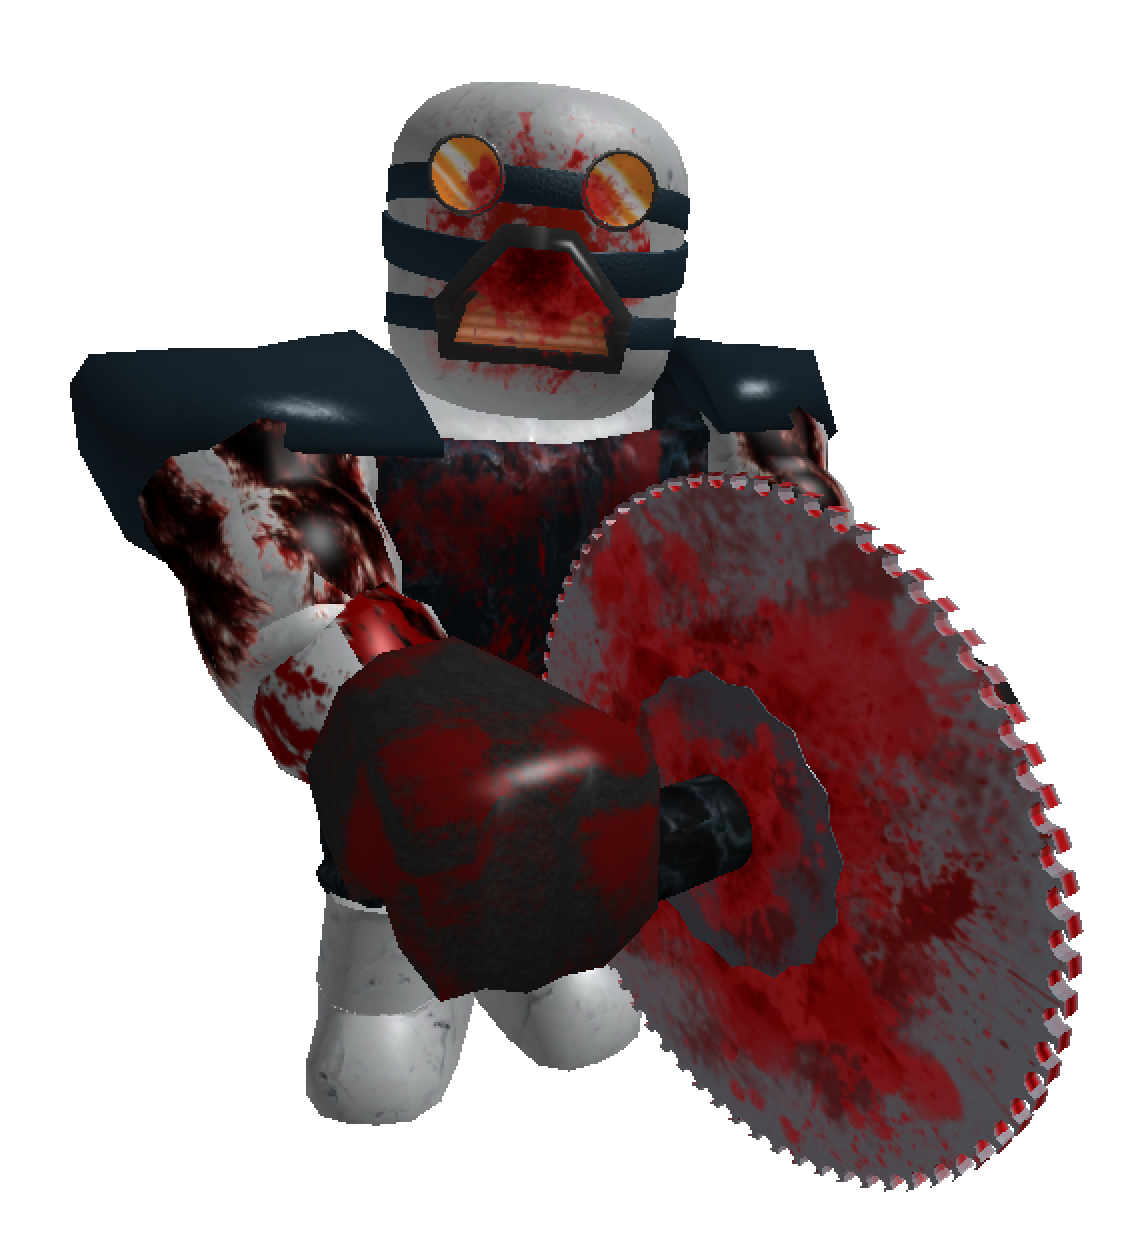 Bloodfest Butcherer By Mario5697 On Deviantart - roblox emerald knight of the seventh sanctum by mario5697